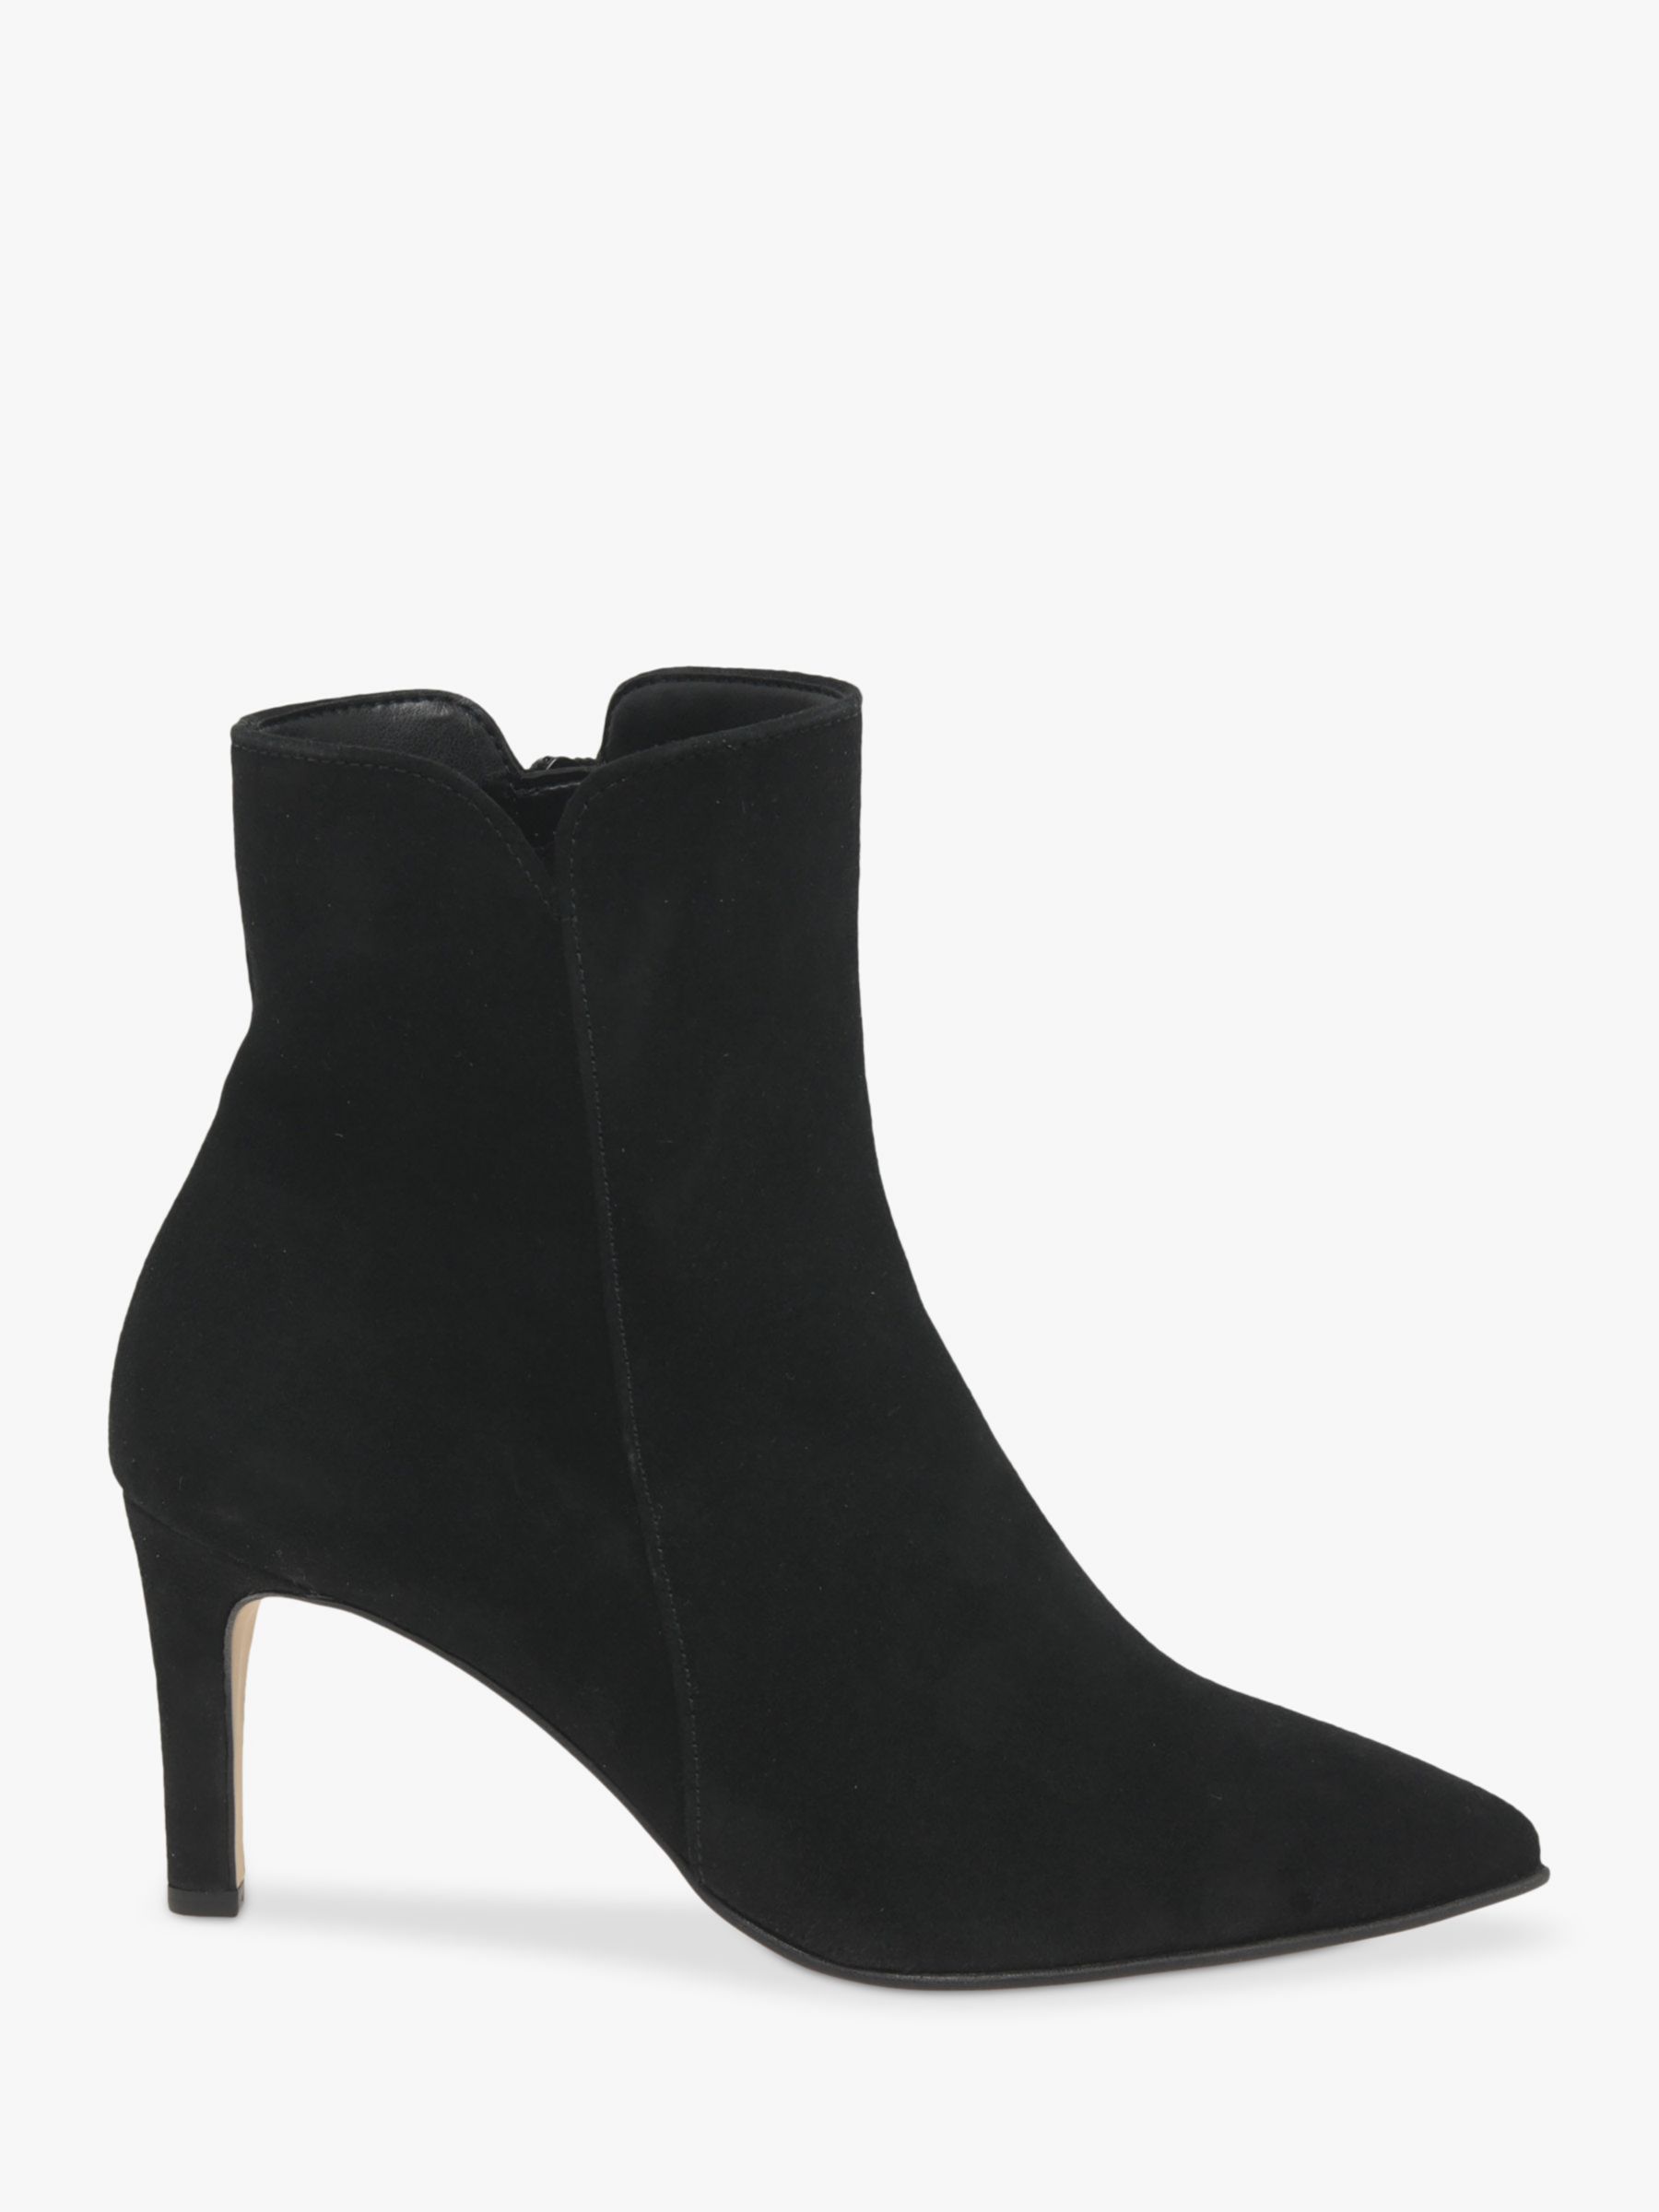 Gabor Bambro Dressy Suede Mid Heel Ankle Boots, Black John Lewis & Partners